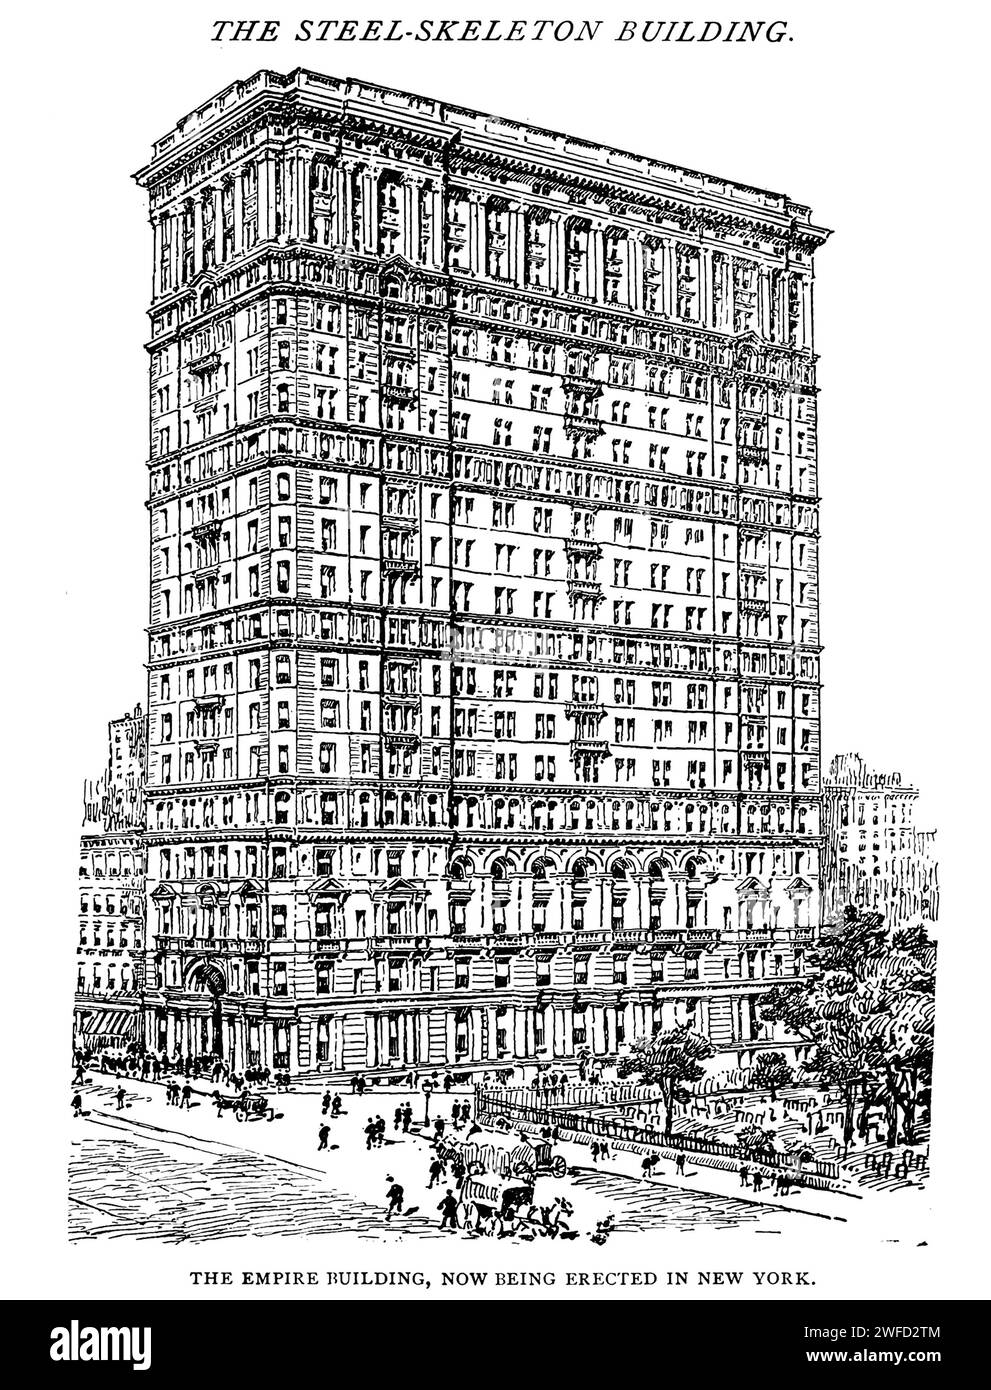 Empire Building, Now being erected in New York from the Article THE ARCHITECTURAL RELATIONS OF THE STEEL-SKELETON BUILDING.By F. H. Kimball. from The Engineering Magazine Devoted to Industrial Progress Volume XI October 1897 The Engineering Magazine Co Stock Photo